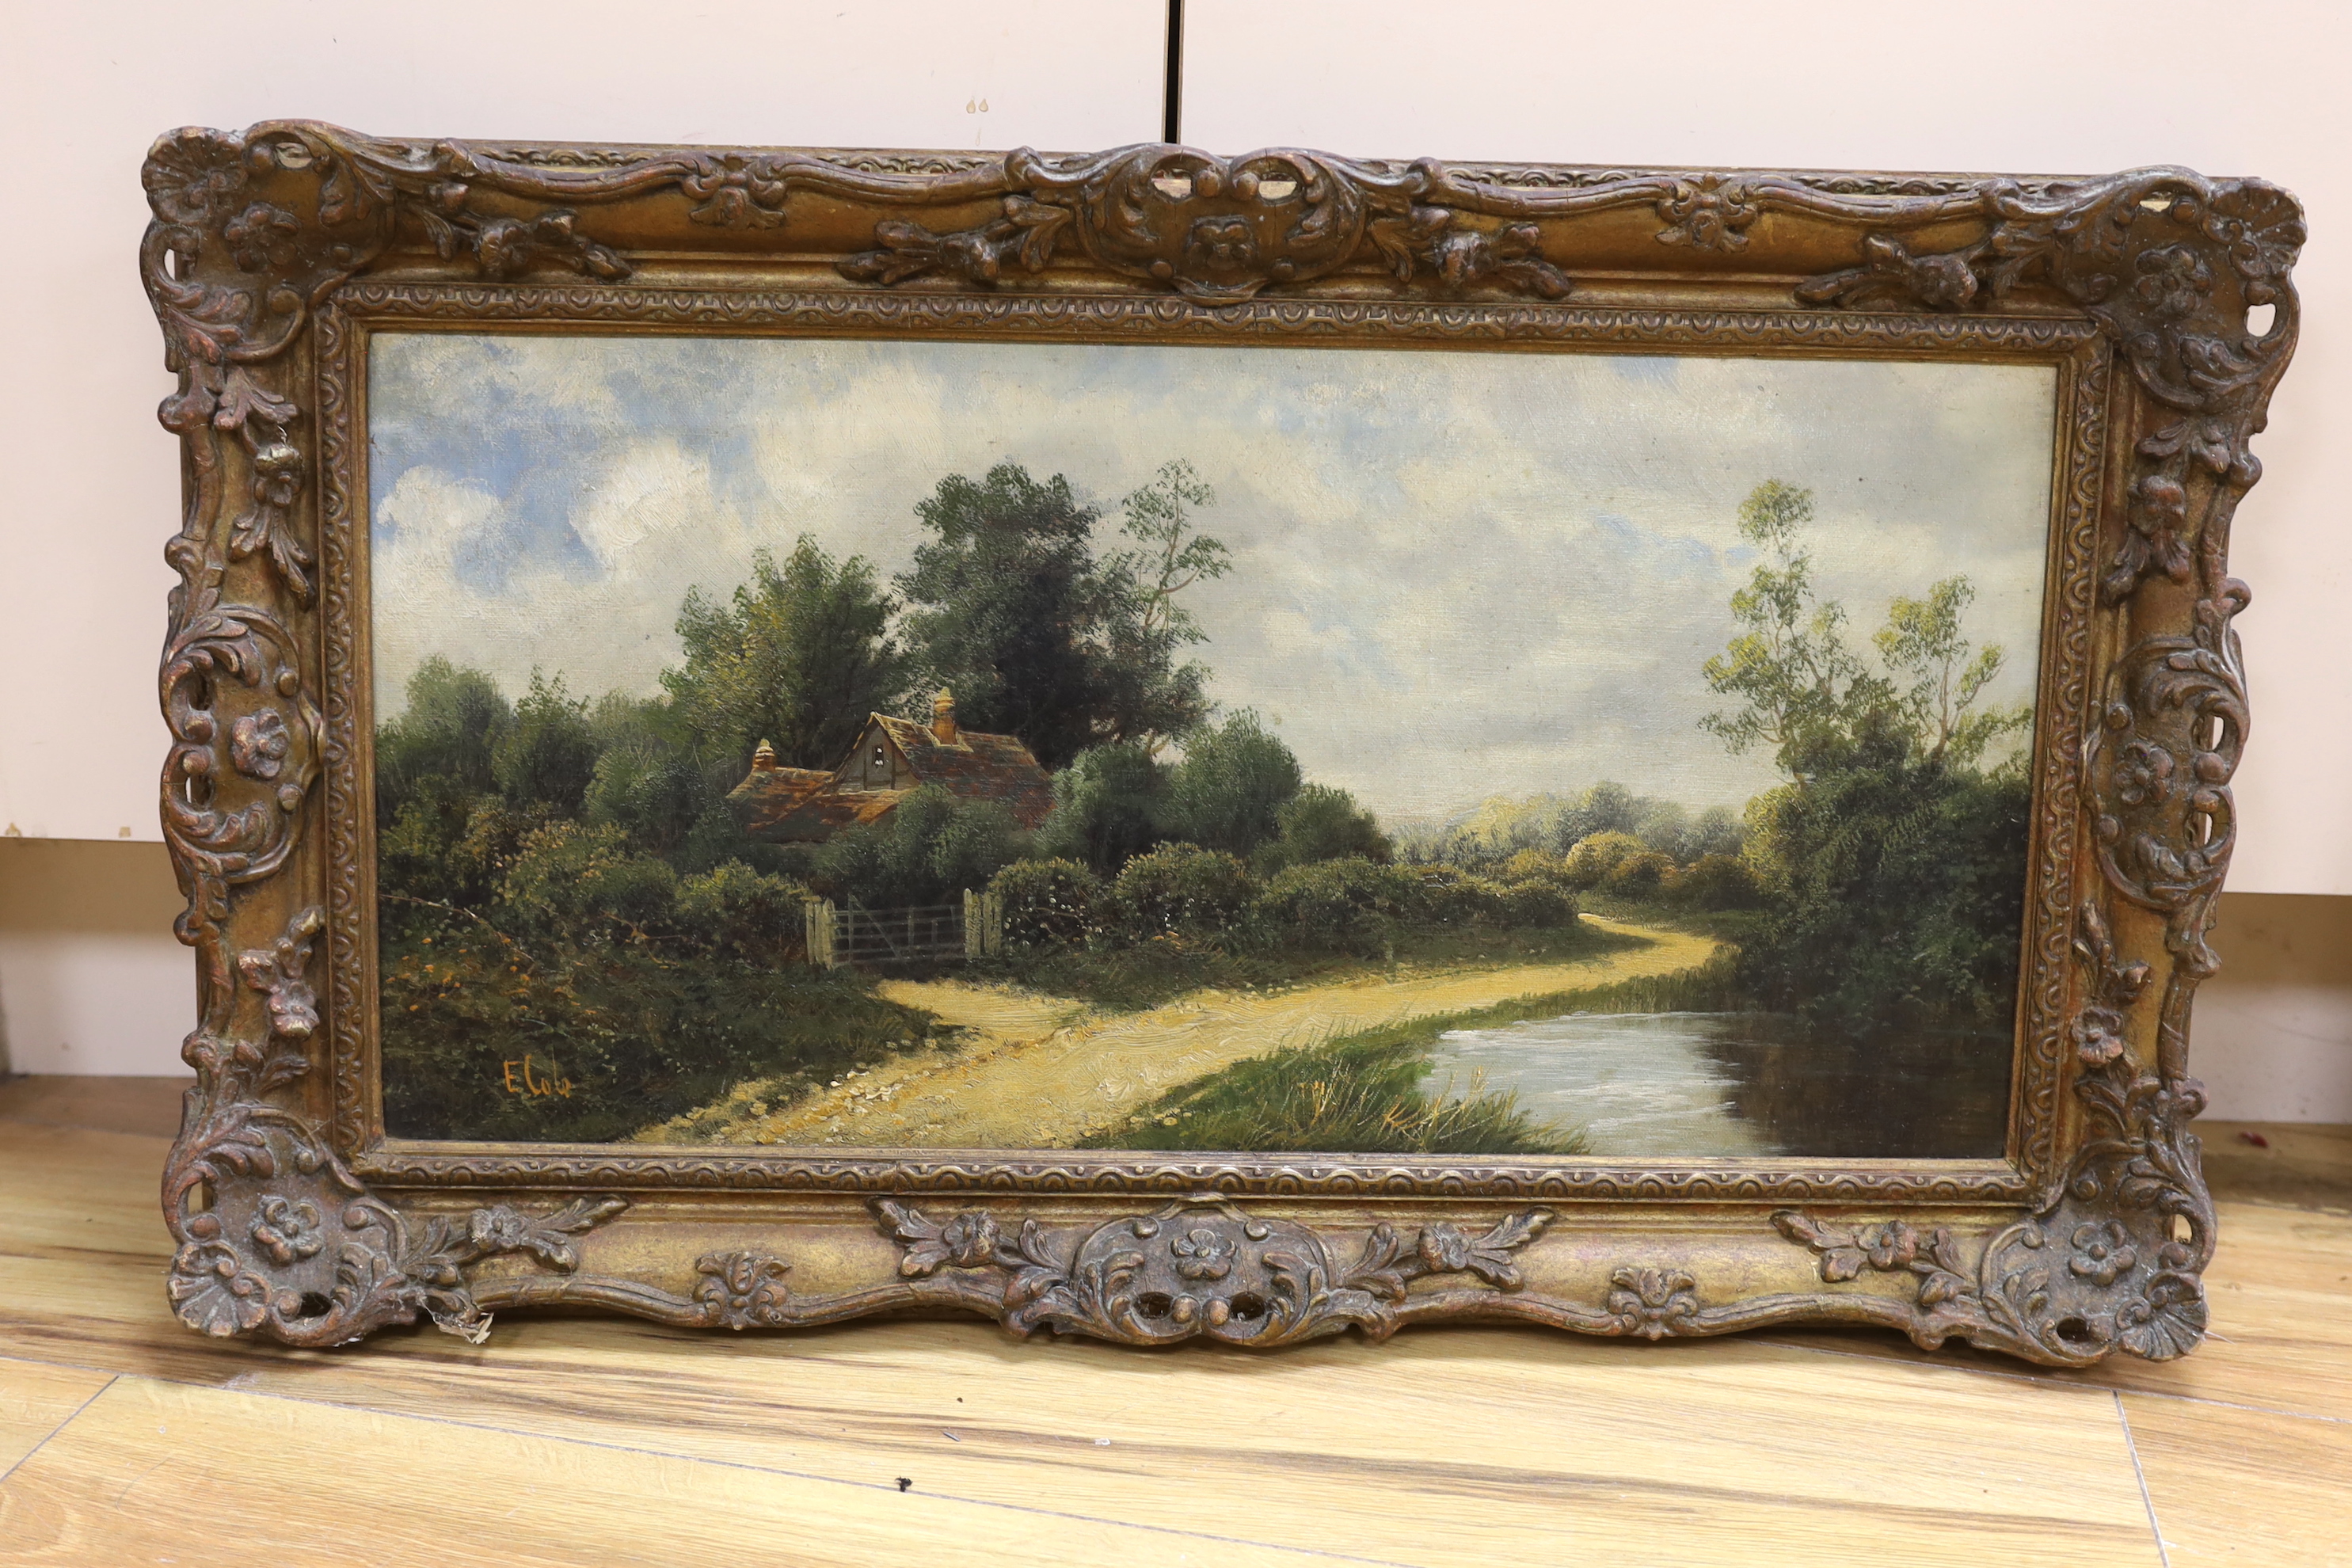 E. Cole, oil on canvas, Cottage in a landscape, signed, 29 x 60cm